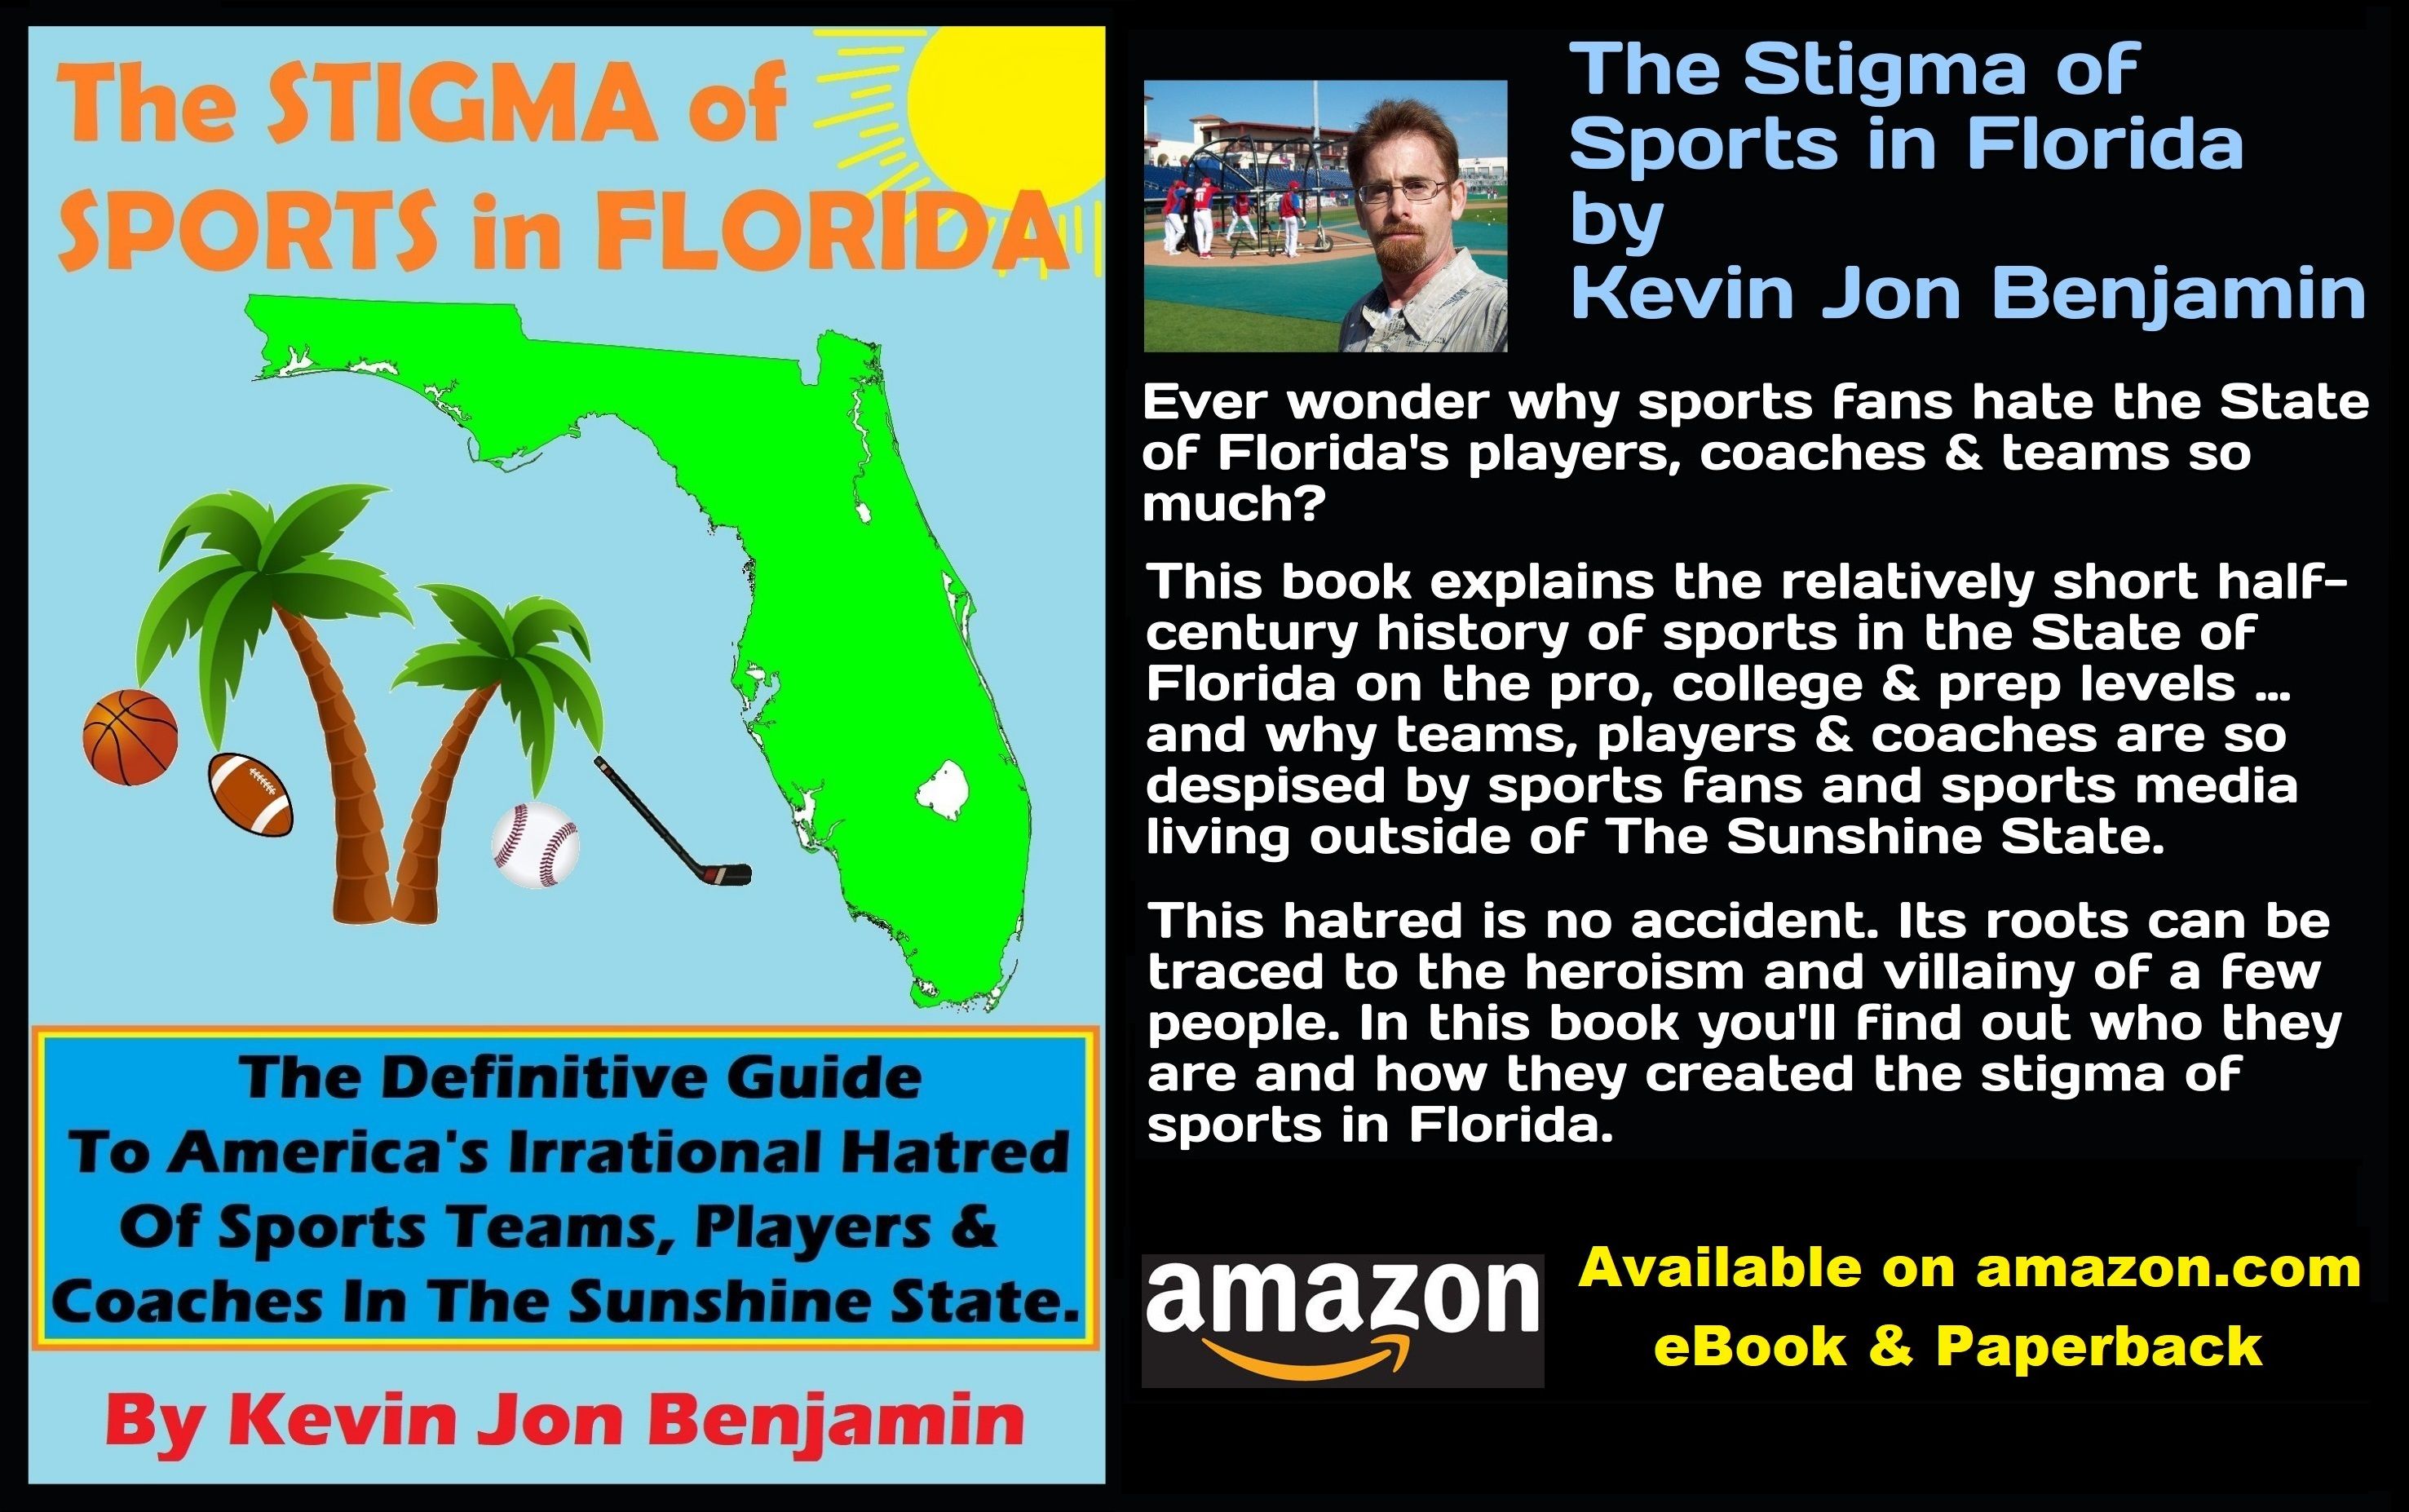 "The Stigma of Sports in Florida" -- New Paperback -- Explains the History of Sports in the Sunshine State - Perfect for Home-Schooling